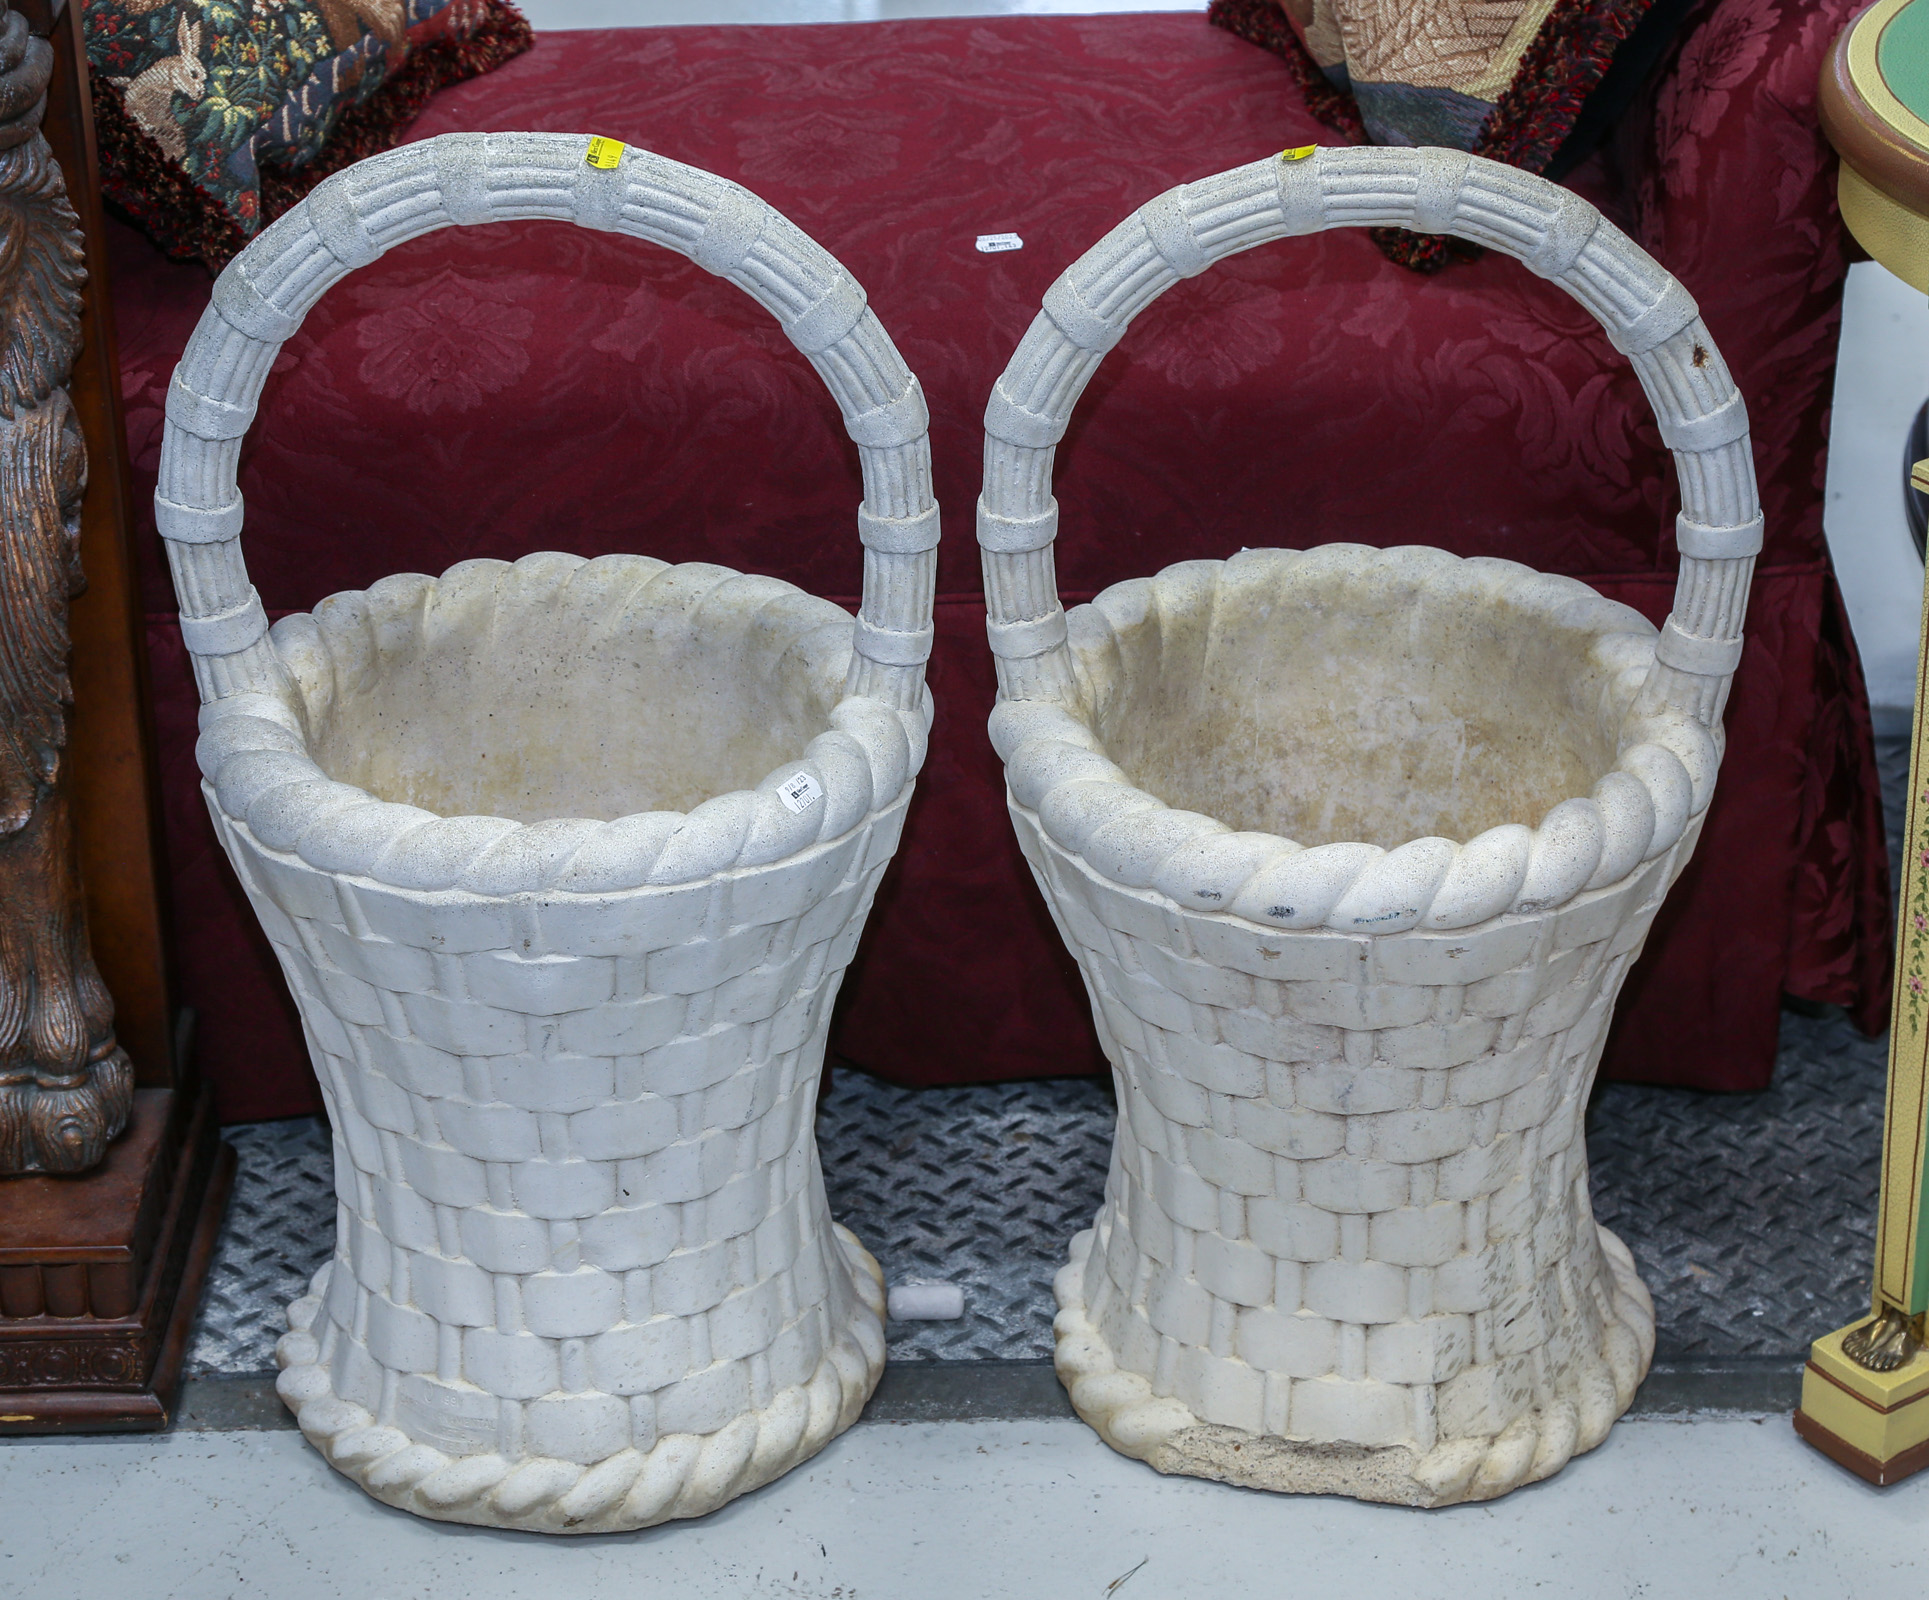 A PAIR OF CEMENT "FLOWER BASKET"